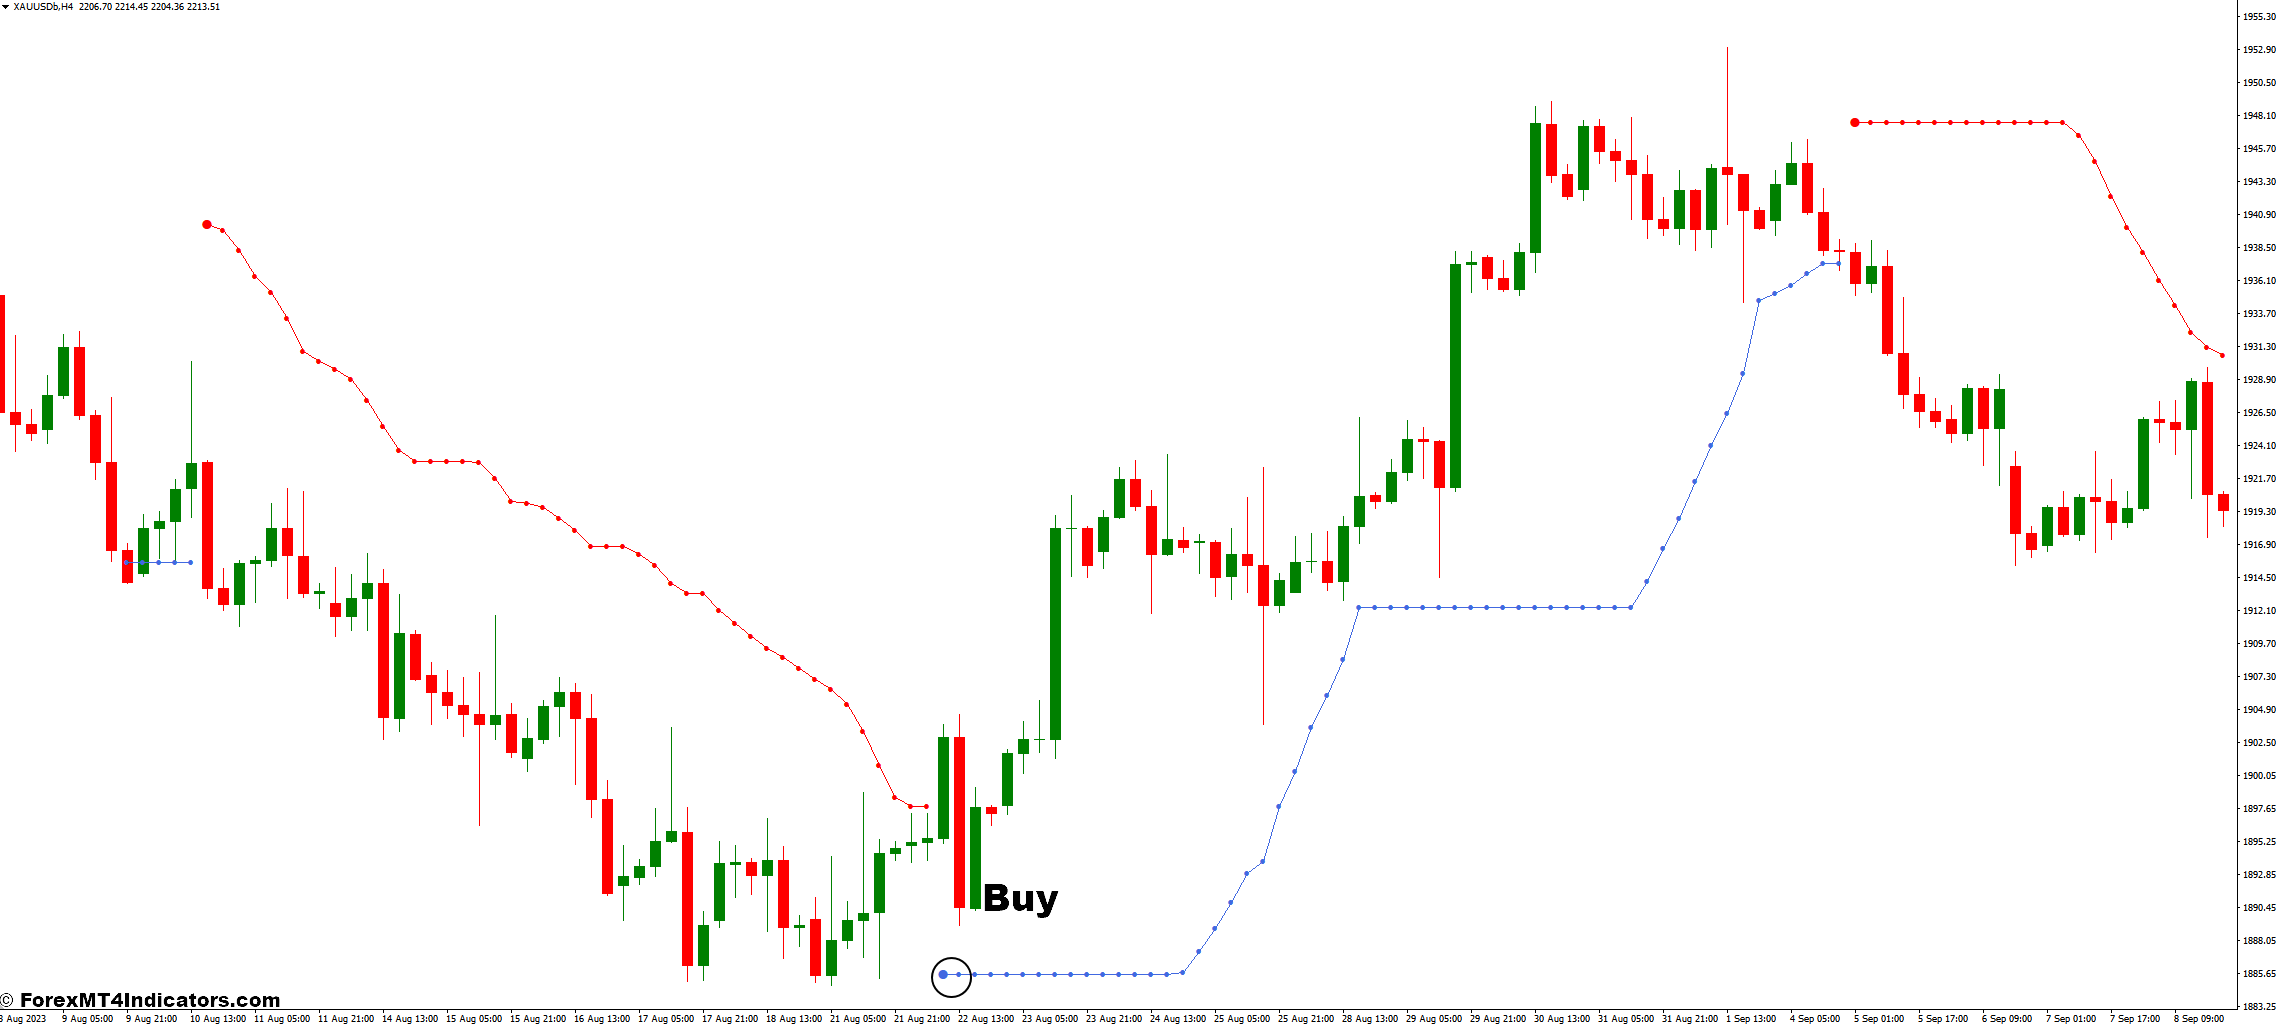 How to Trade with the TopTrend Indicator - Buy Entry